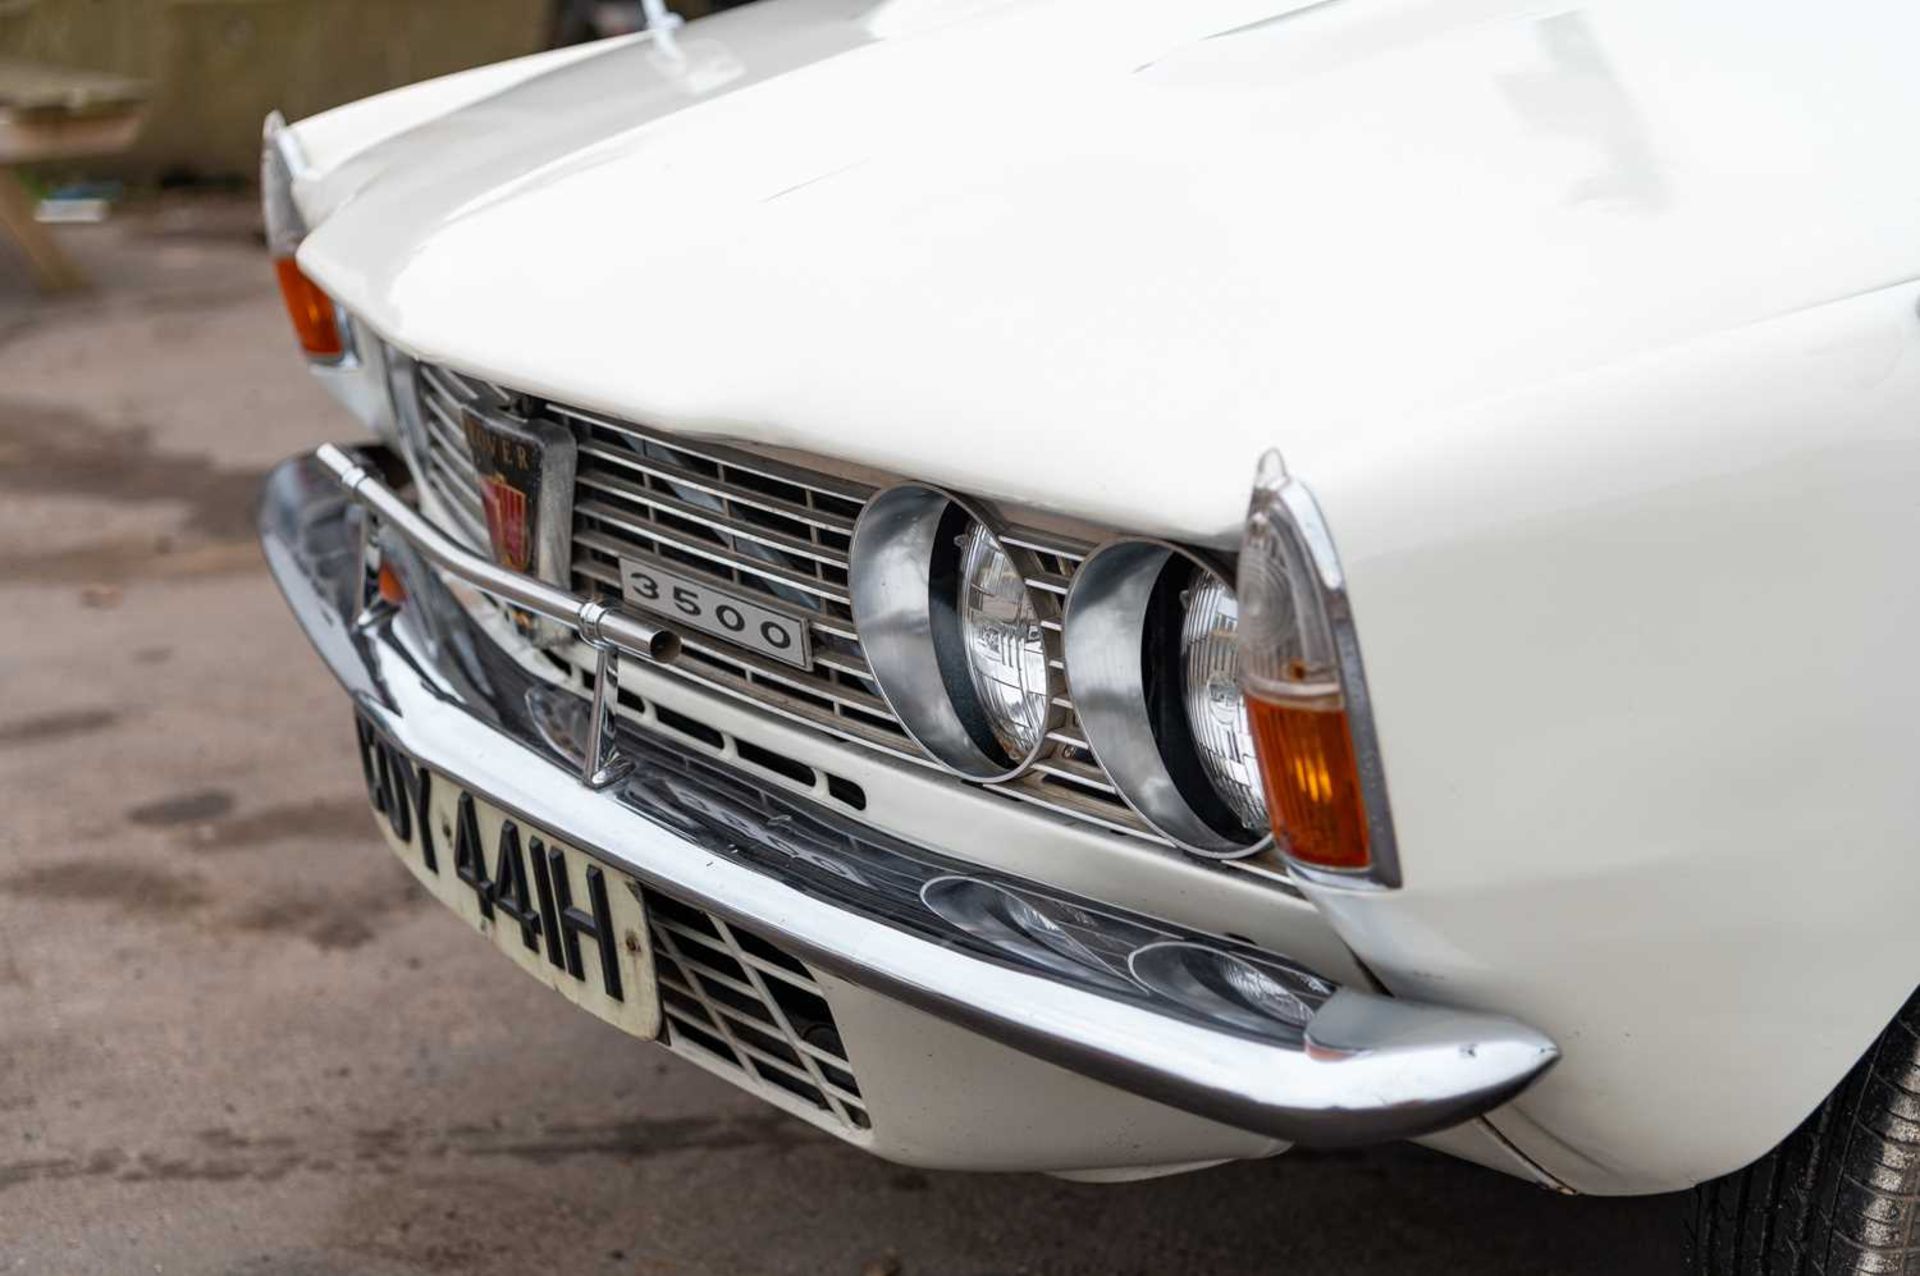 1969 Rover P6 3500 - Image 20 of 71